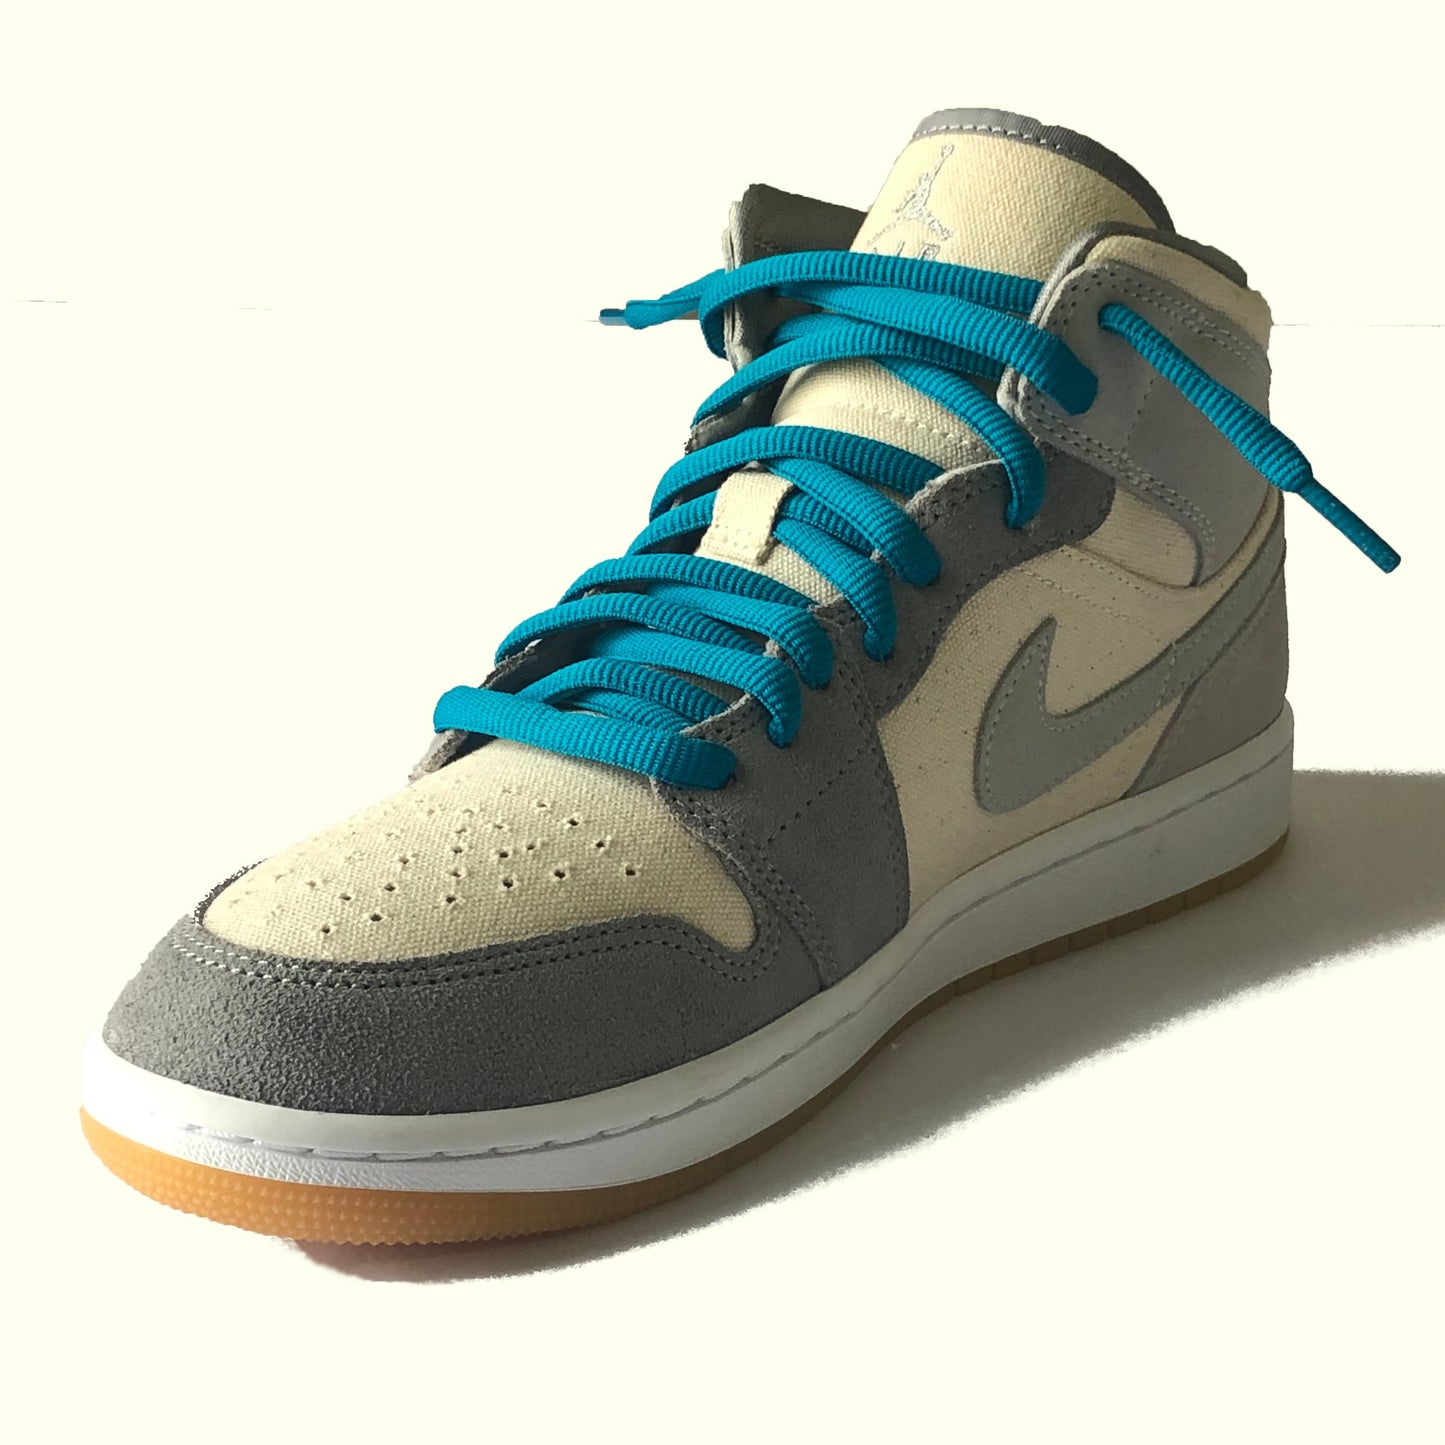 Jade Blue | SB Dunks Inspired Oval laces